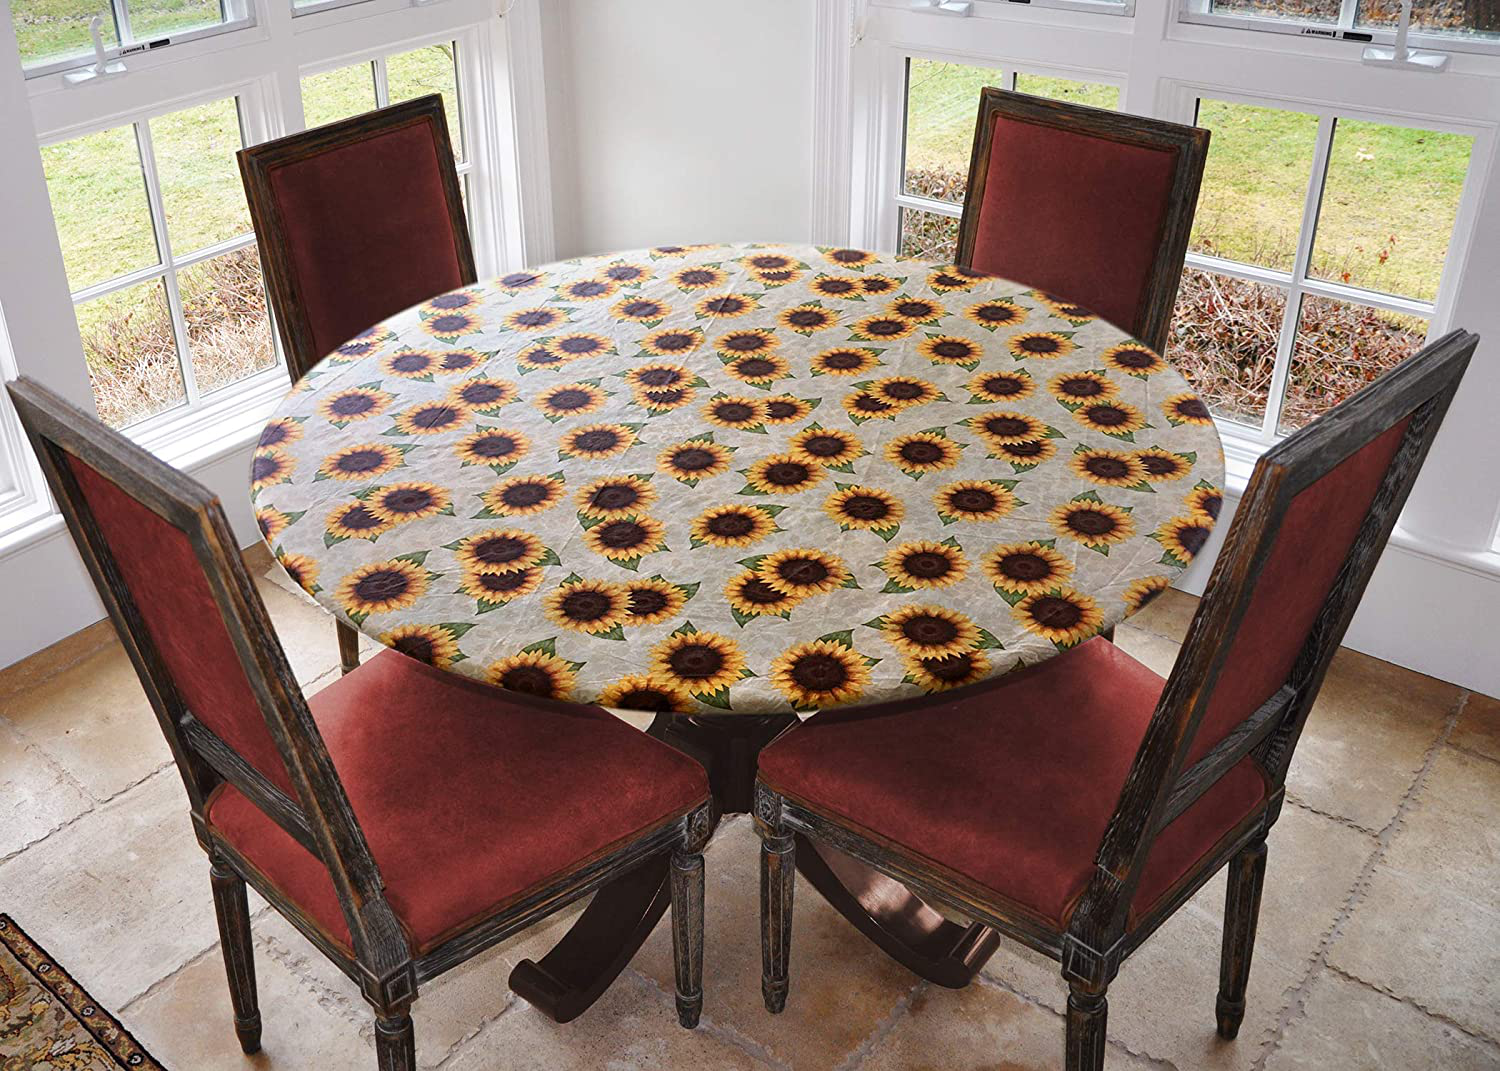 Covers For The Home Deluxe Elastic Edged Flannel Backed Vinyl Fitted Table Cover - Antique Fruit Pattern - Small Round - Fits Tables up to 40" - 44" Diameter